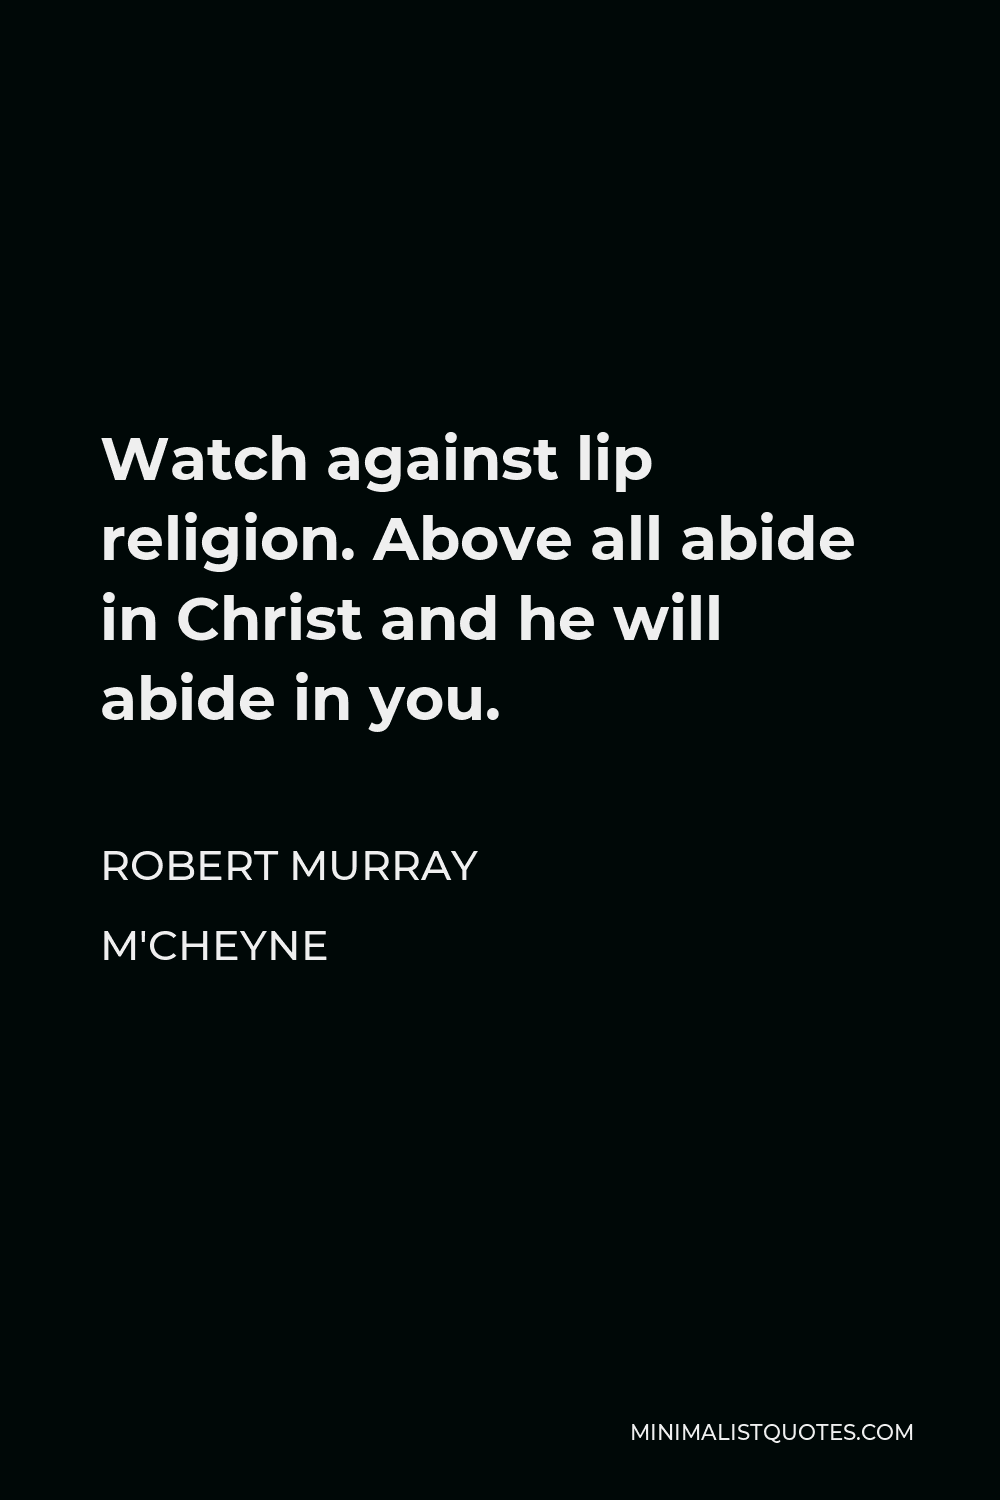 Robert Murray M'Cheyne Quote - Watch against lip religion. Above all abide in Christ and he will abide in you.